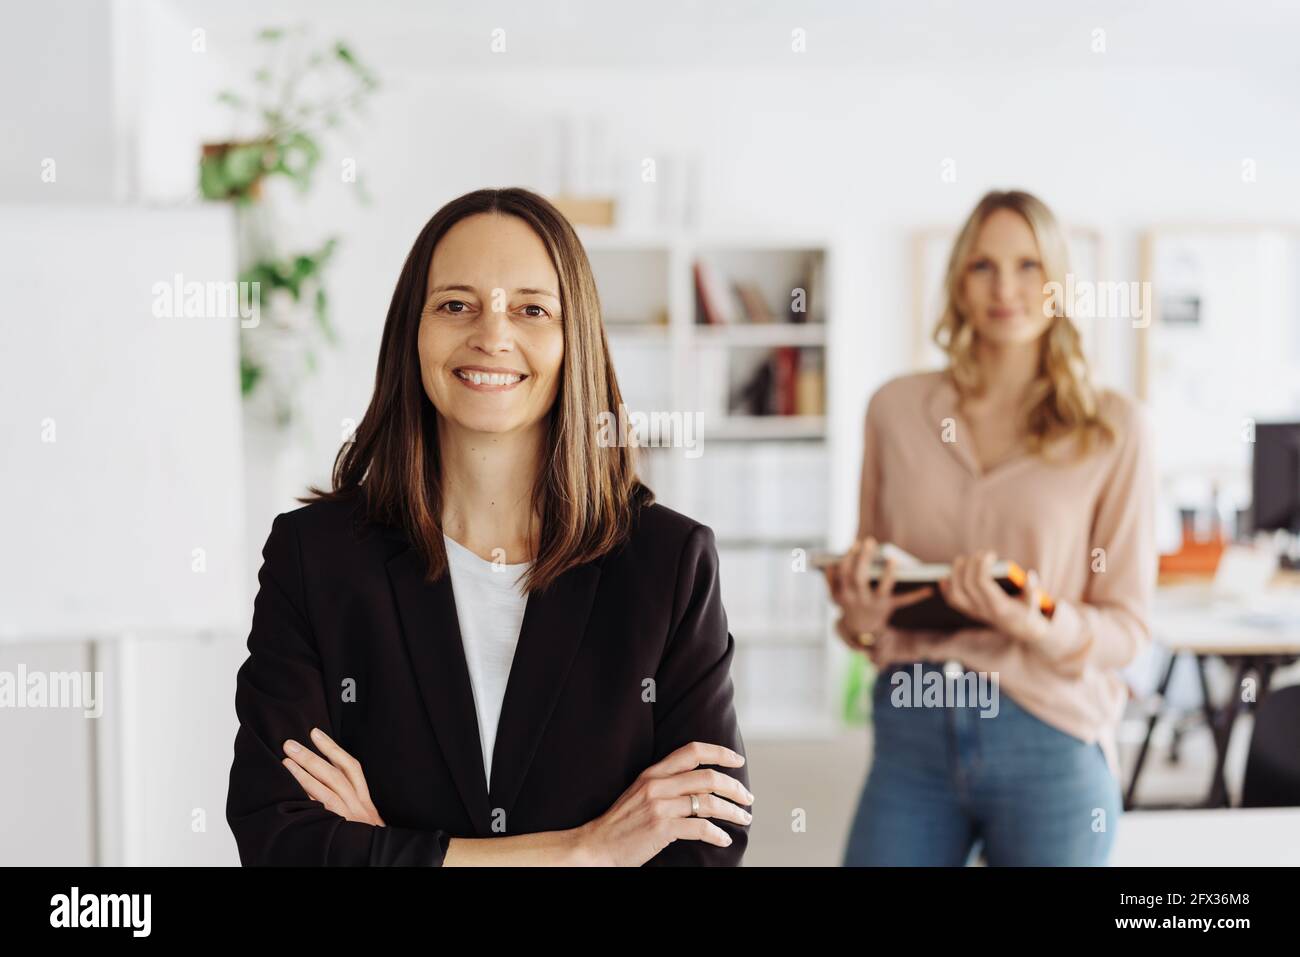 Happy confident successful manageress or business partner posing with folded arms smiling at the camera with her colleague behind her Stock Photo